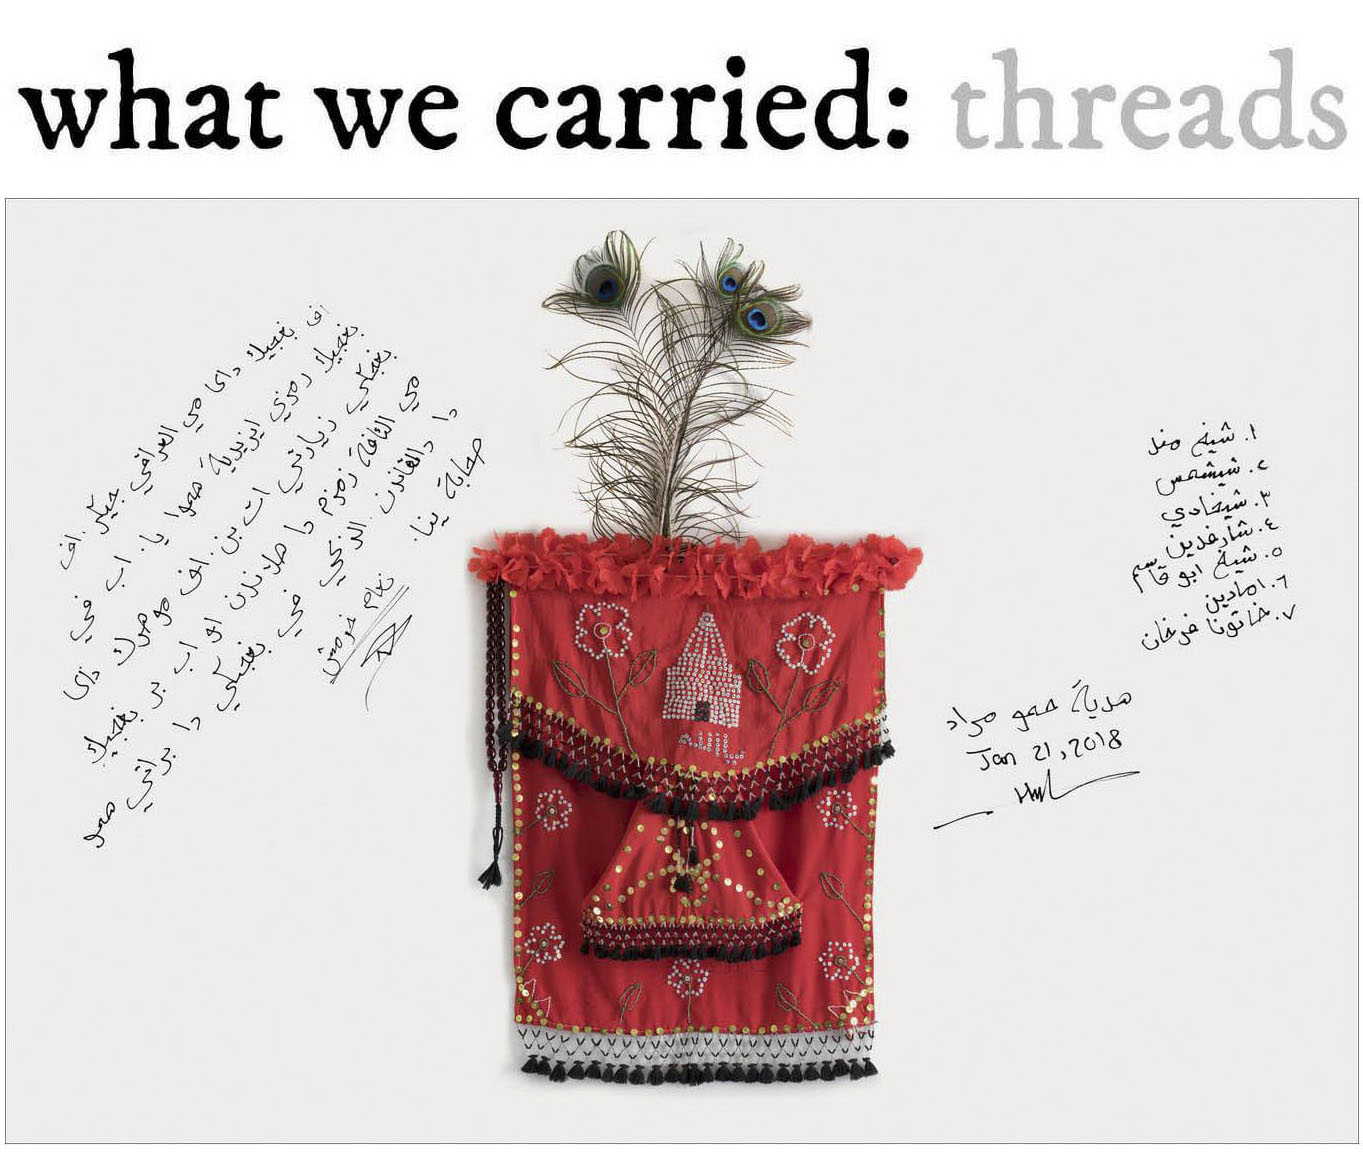 What We Carried: Threads